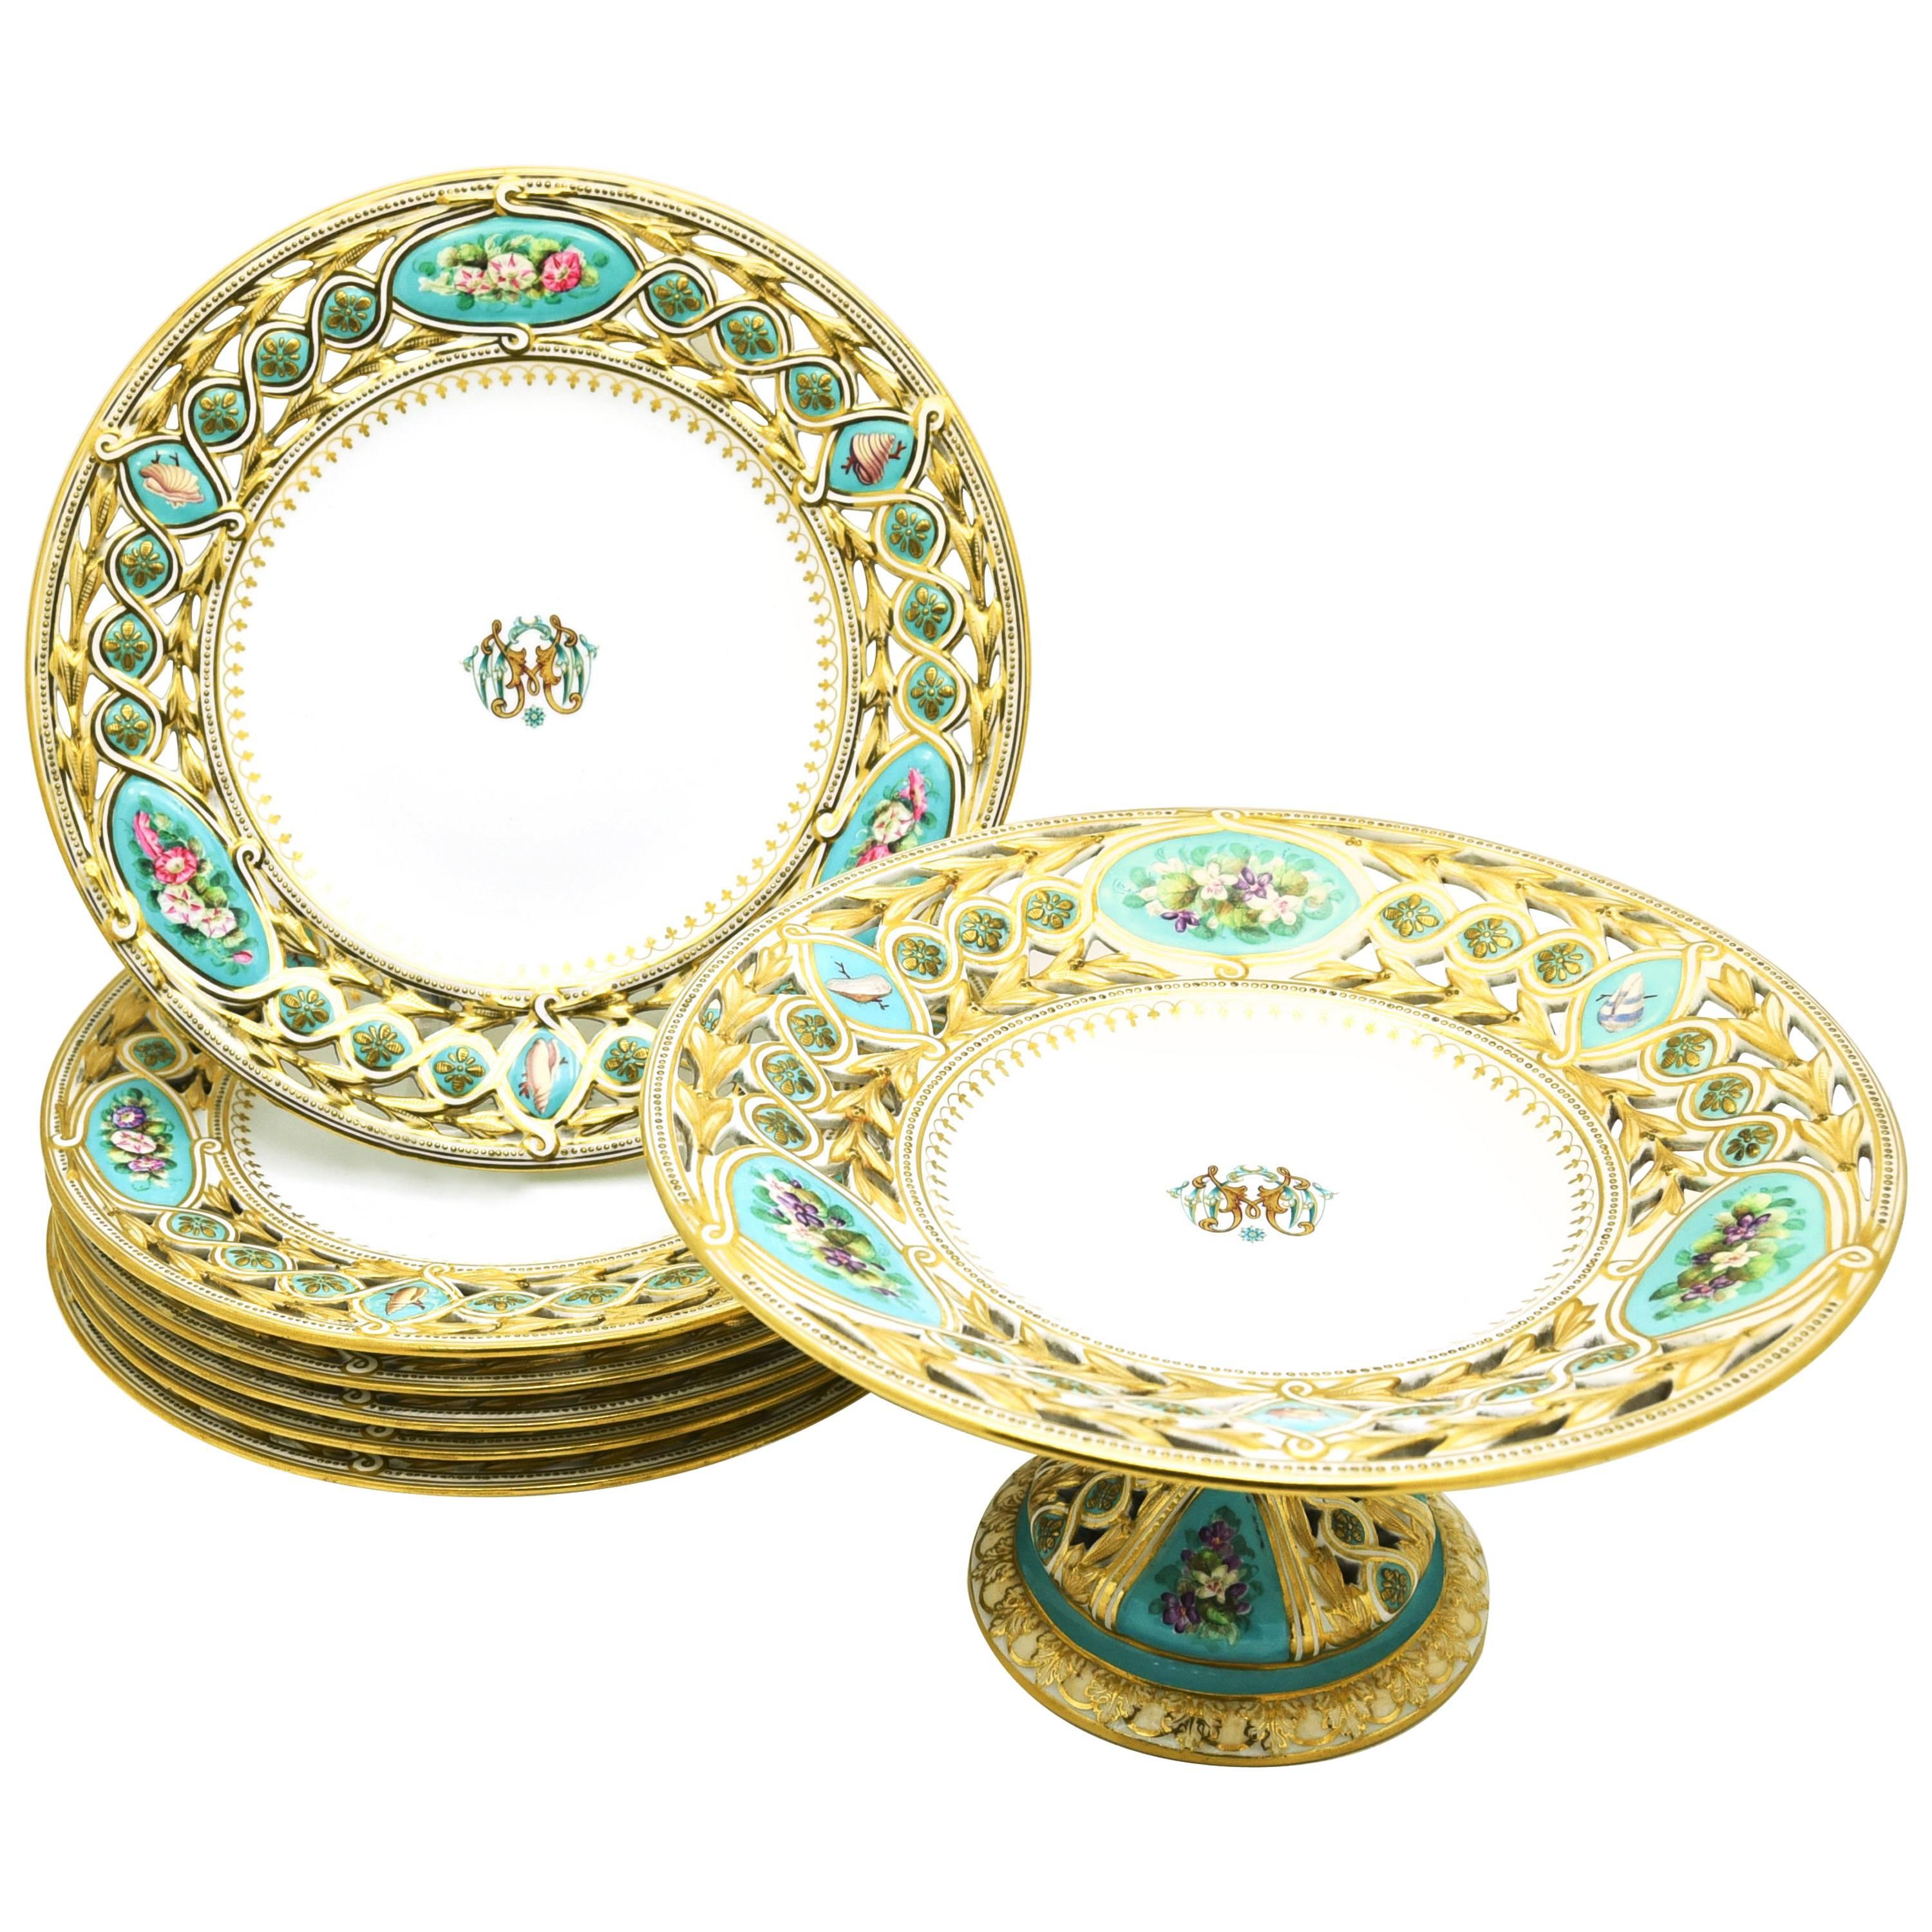 19th Century Worcester Hand-Painted Turquoise Partial Dessert Set